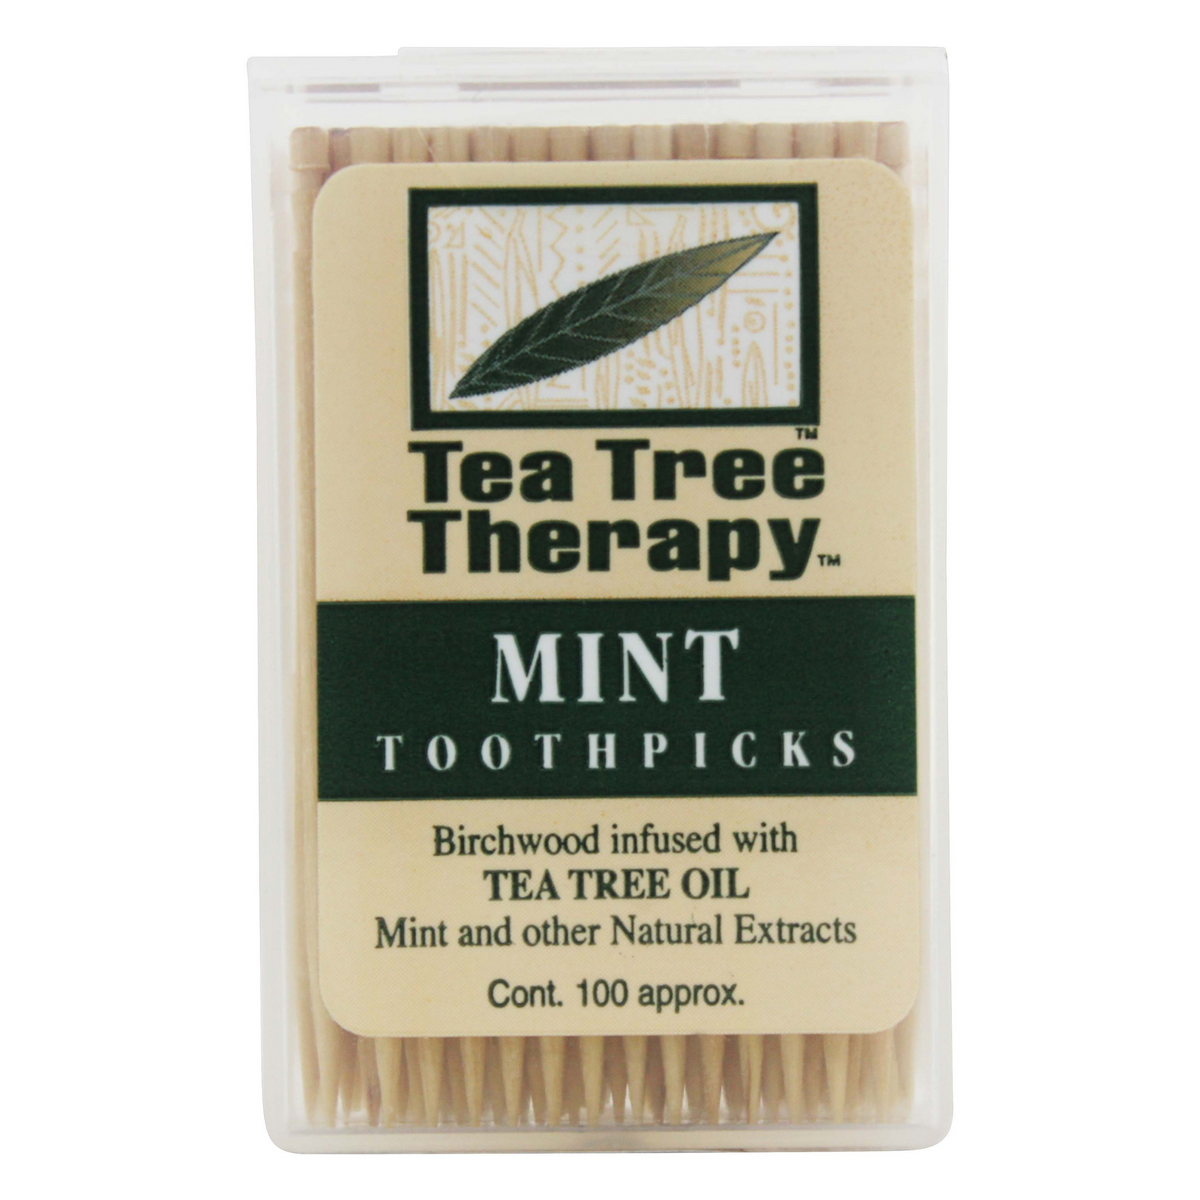 Primary Image of Tea Tree Therapy Mint Toothpicks (100 count)